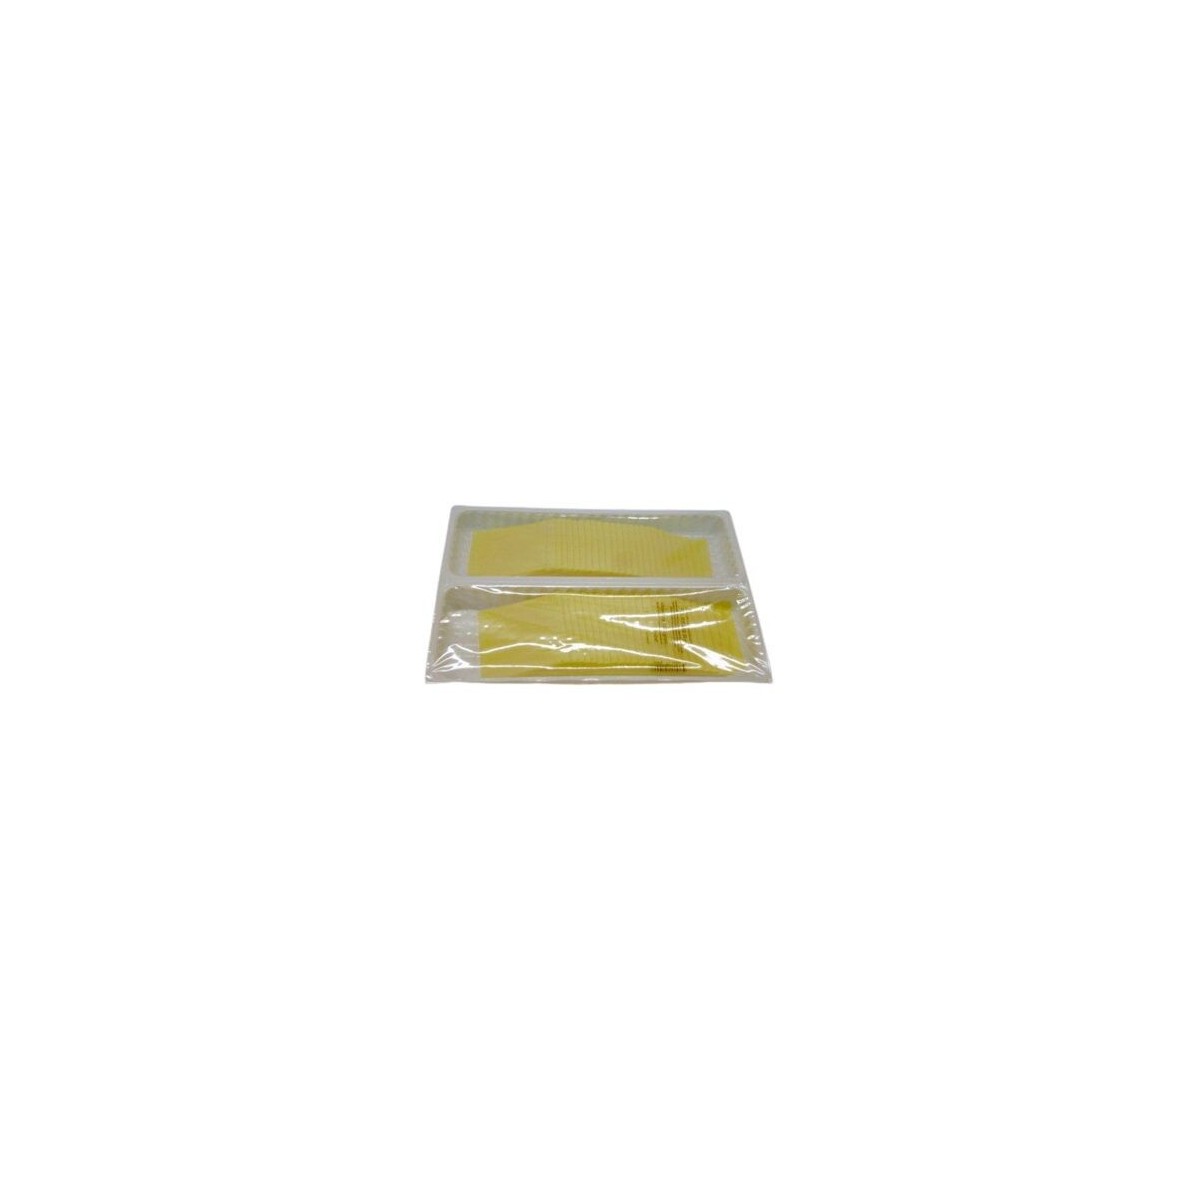 GOUDA CHEESE SLICED 10/10 SQUARES VEPO CHEESE 6 X 1KG  PACKAGE